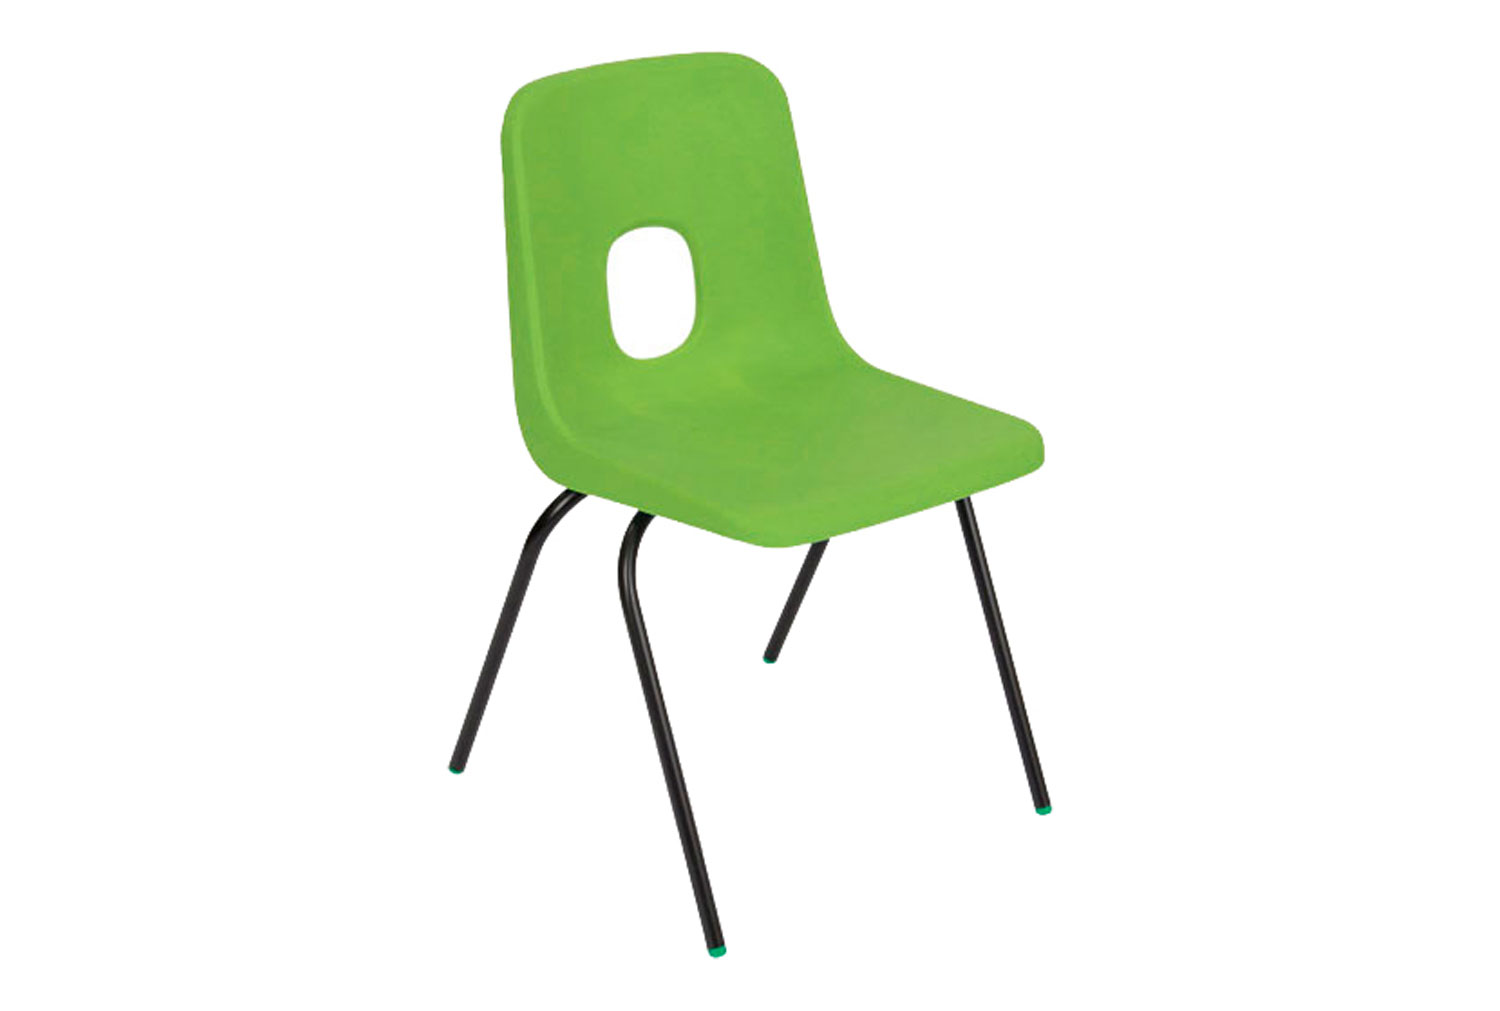 Qty 8 - Hille E Series Classroom Chair, 3-4 Years - 30wx25dx26h (cm), Black Frame, Acid Green